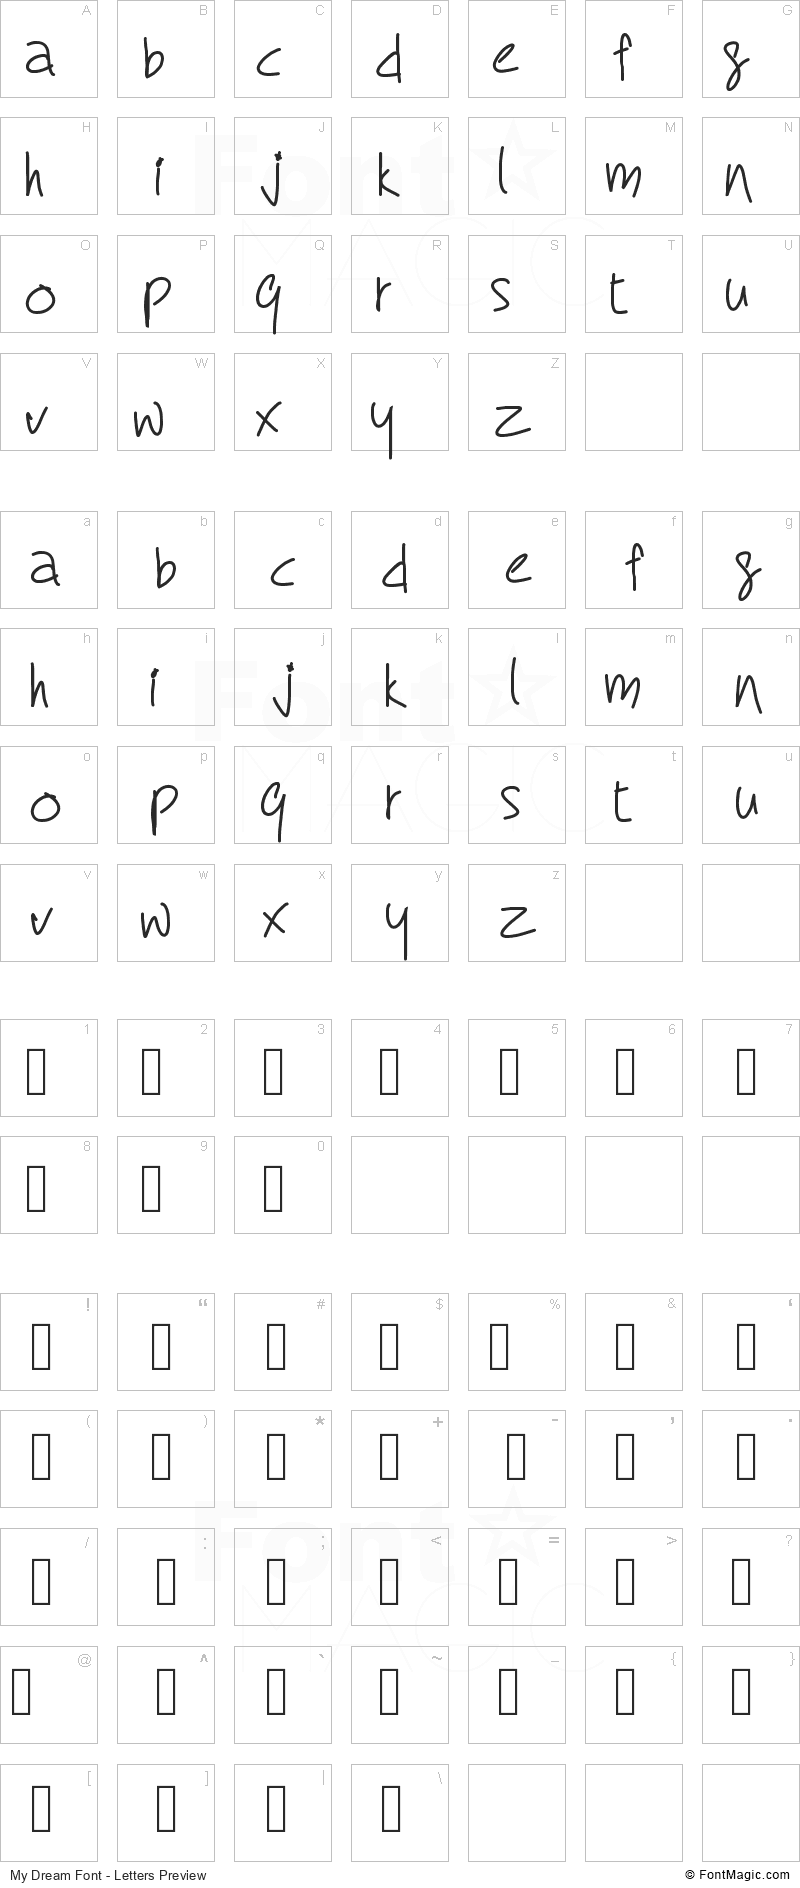 My Dream Font - All Latters Preview Chart